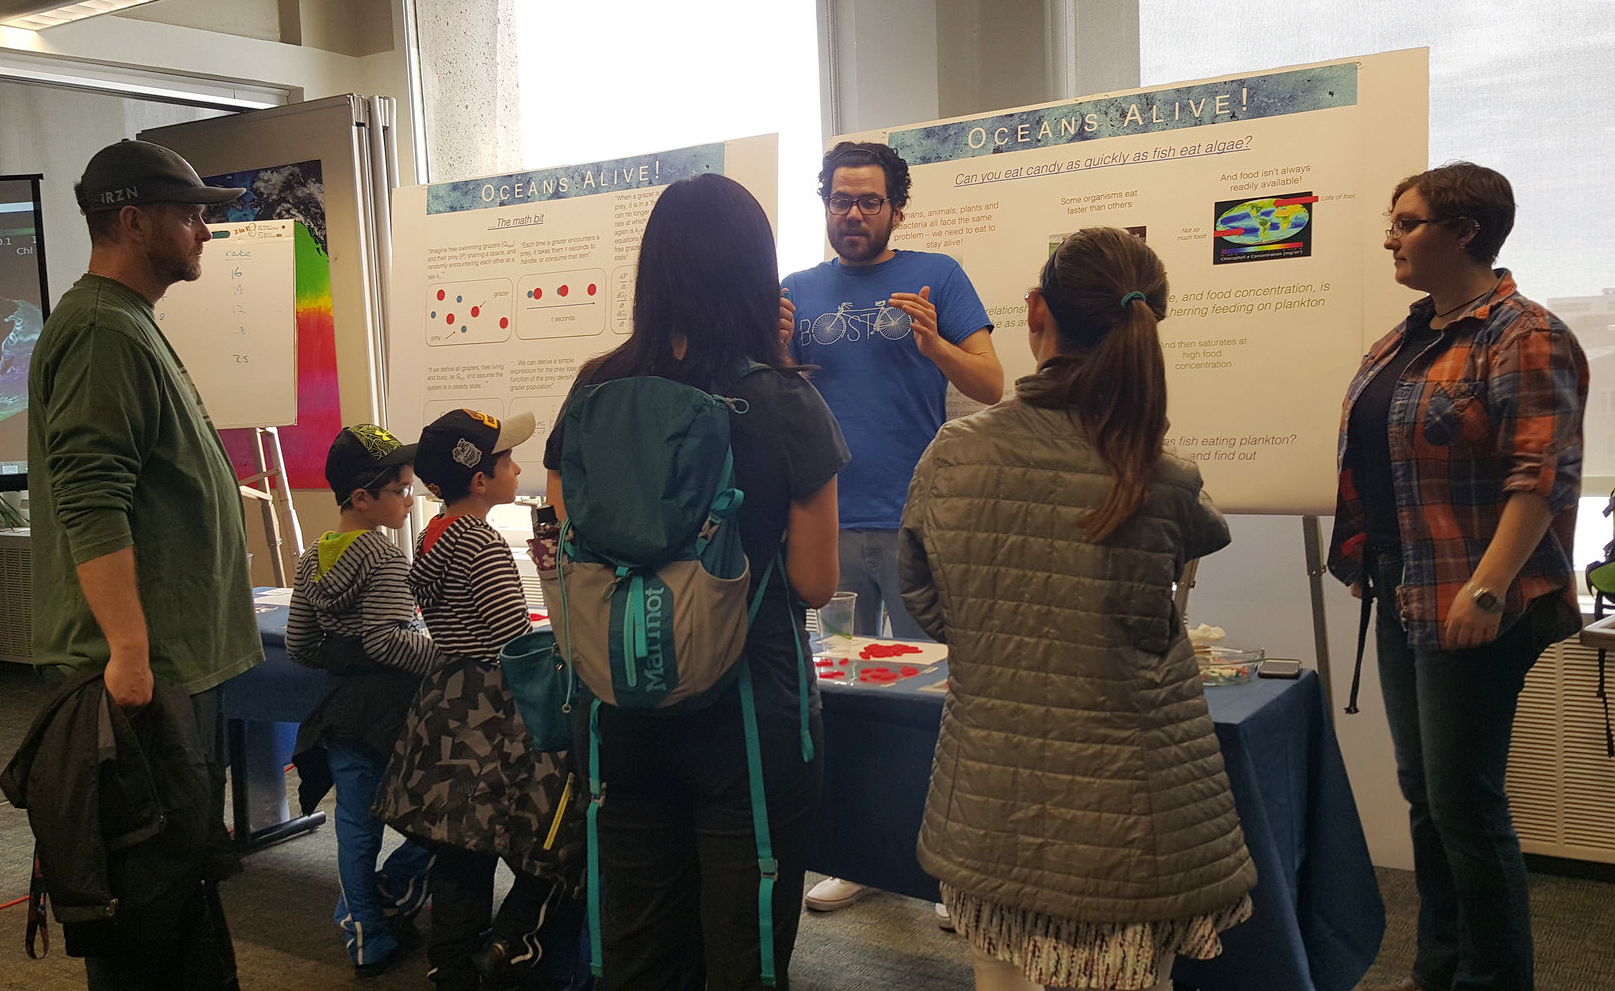 EAPS postdoc David Talmy helping guests understand math principles of some marine processes and illustrates them with a "fishing" game. (Image: Deepa Rao)